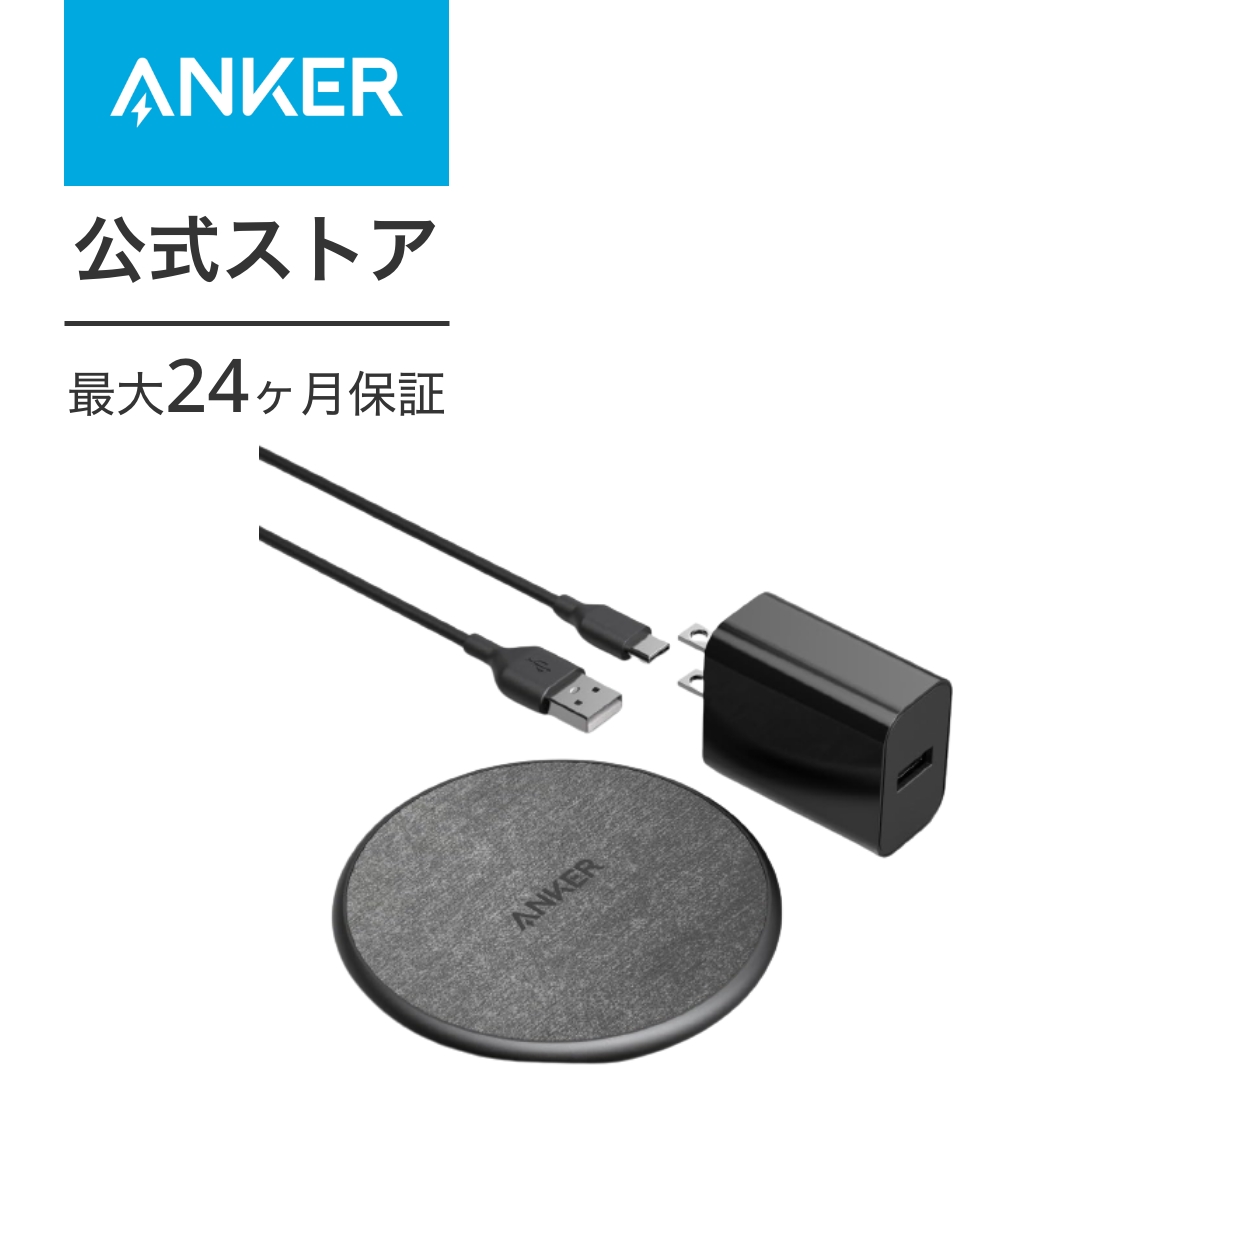 Anker Anker 318 Wireless Charger （Pad） B2548NF1 （ブラック） ワイヤレス充電器の商品画像